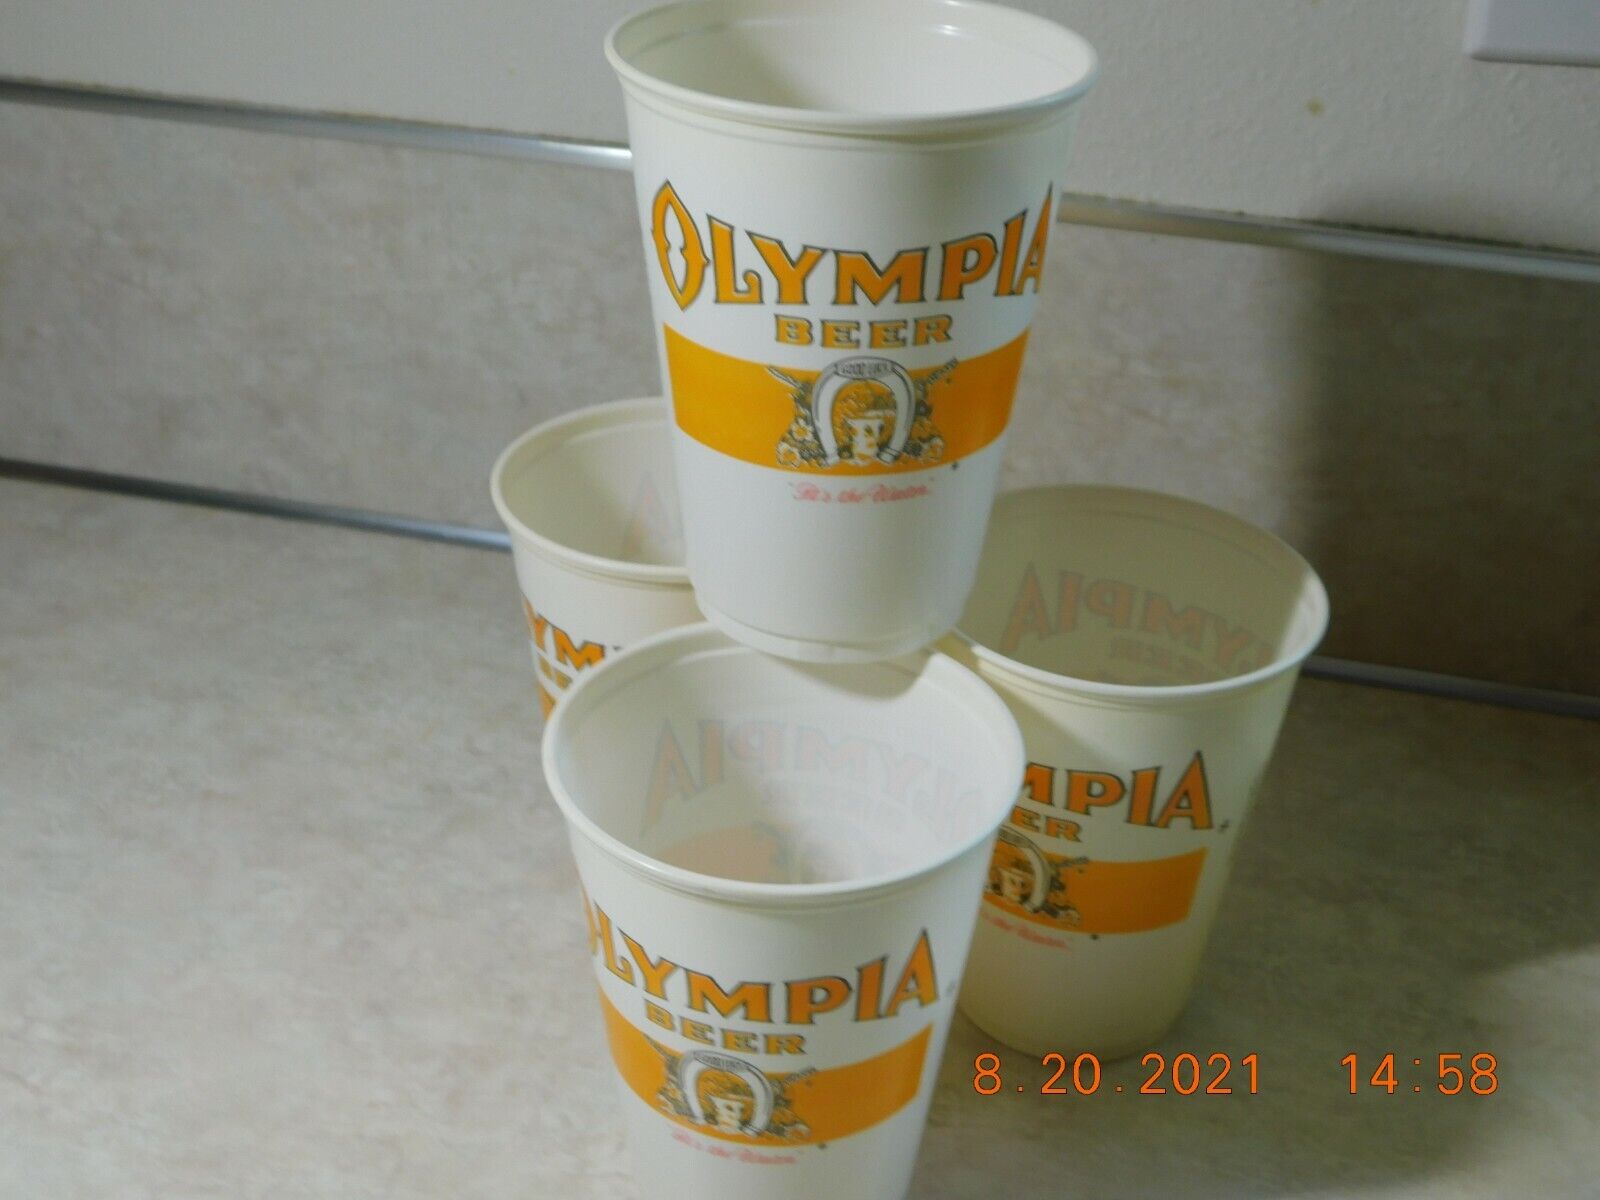 70's 80's OLYMPIA BEER Keg "It's the Water" Cups 12 oz SOLO NEW Unused  Без бренда